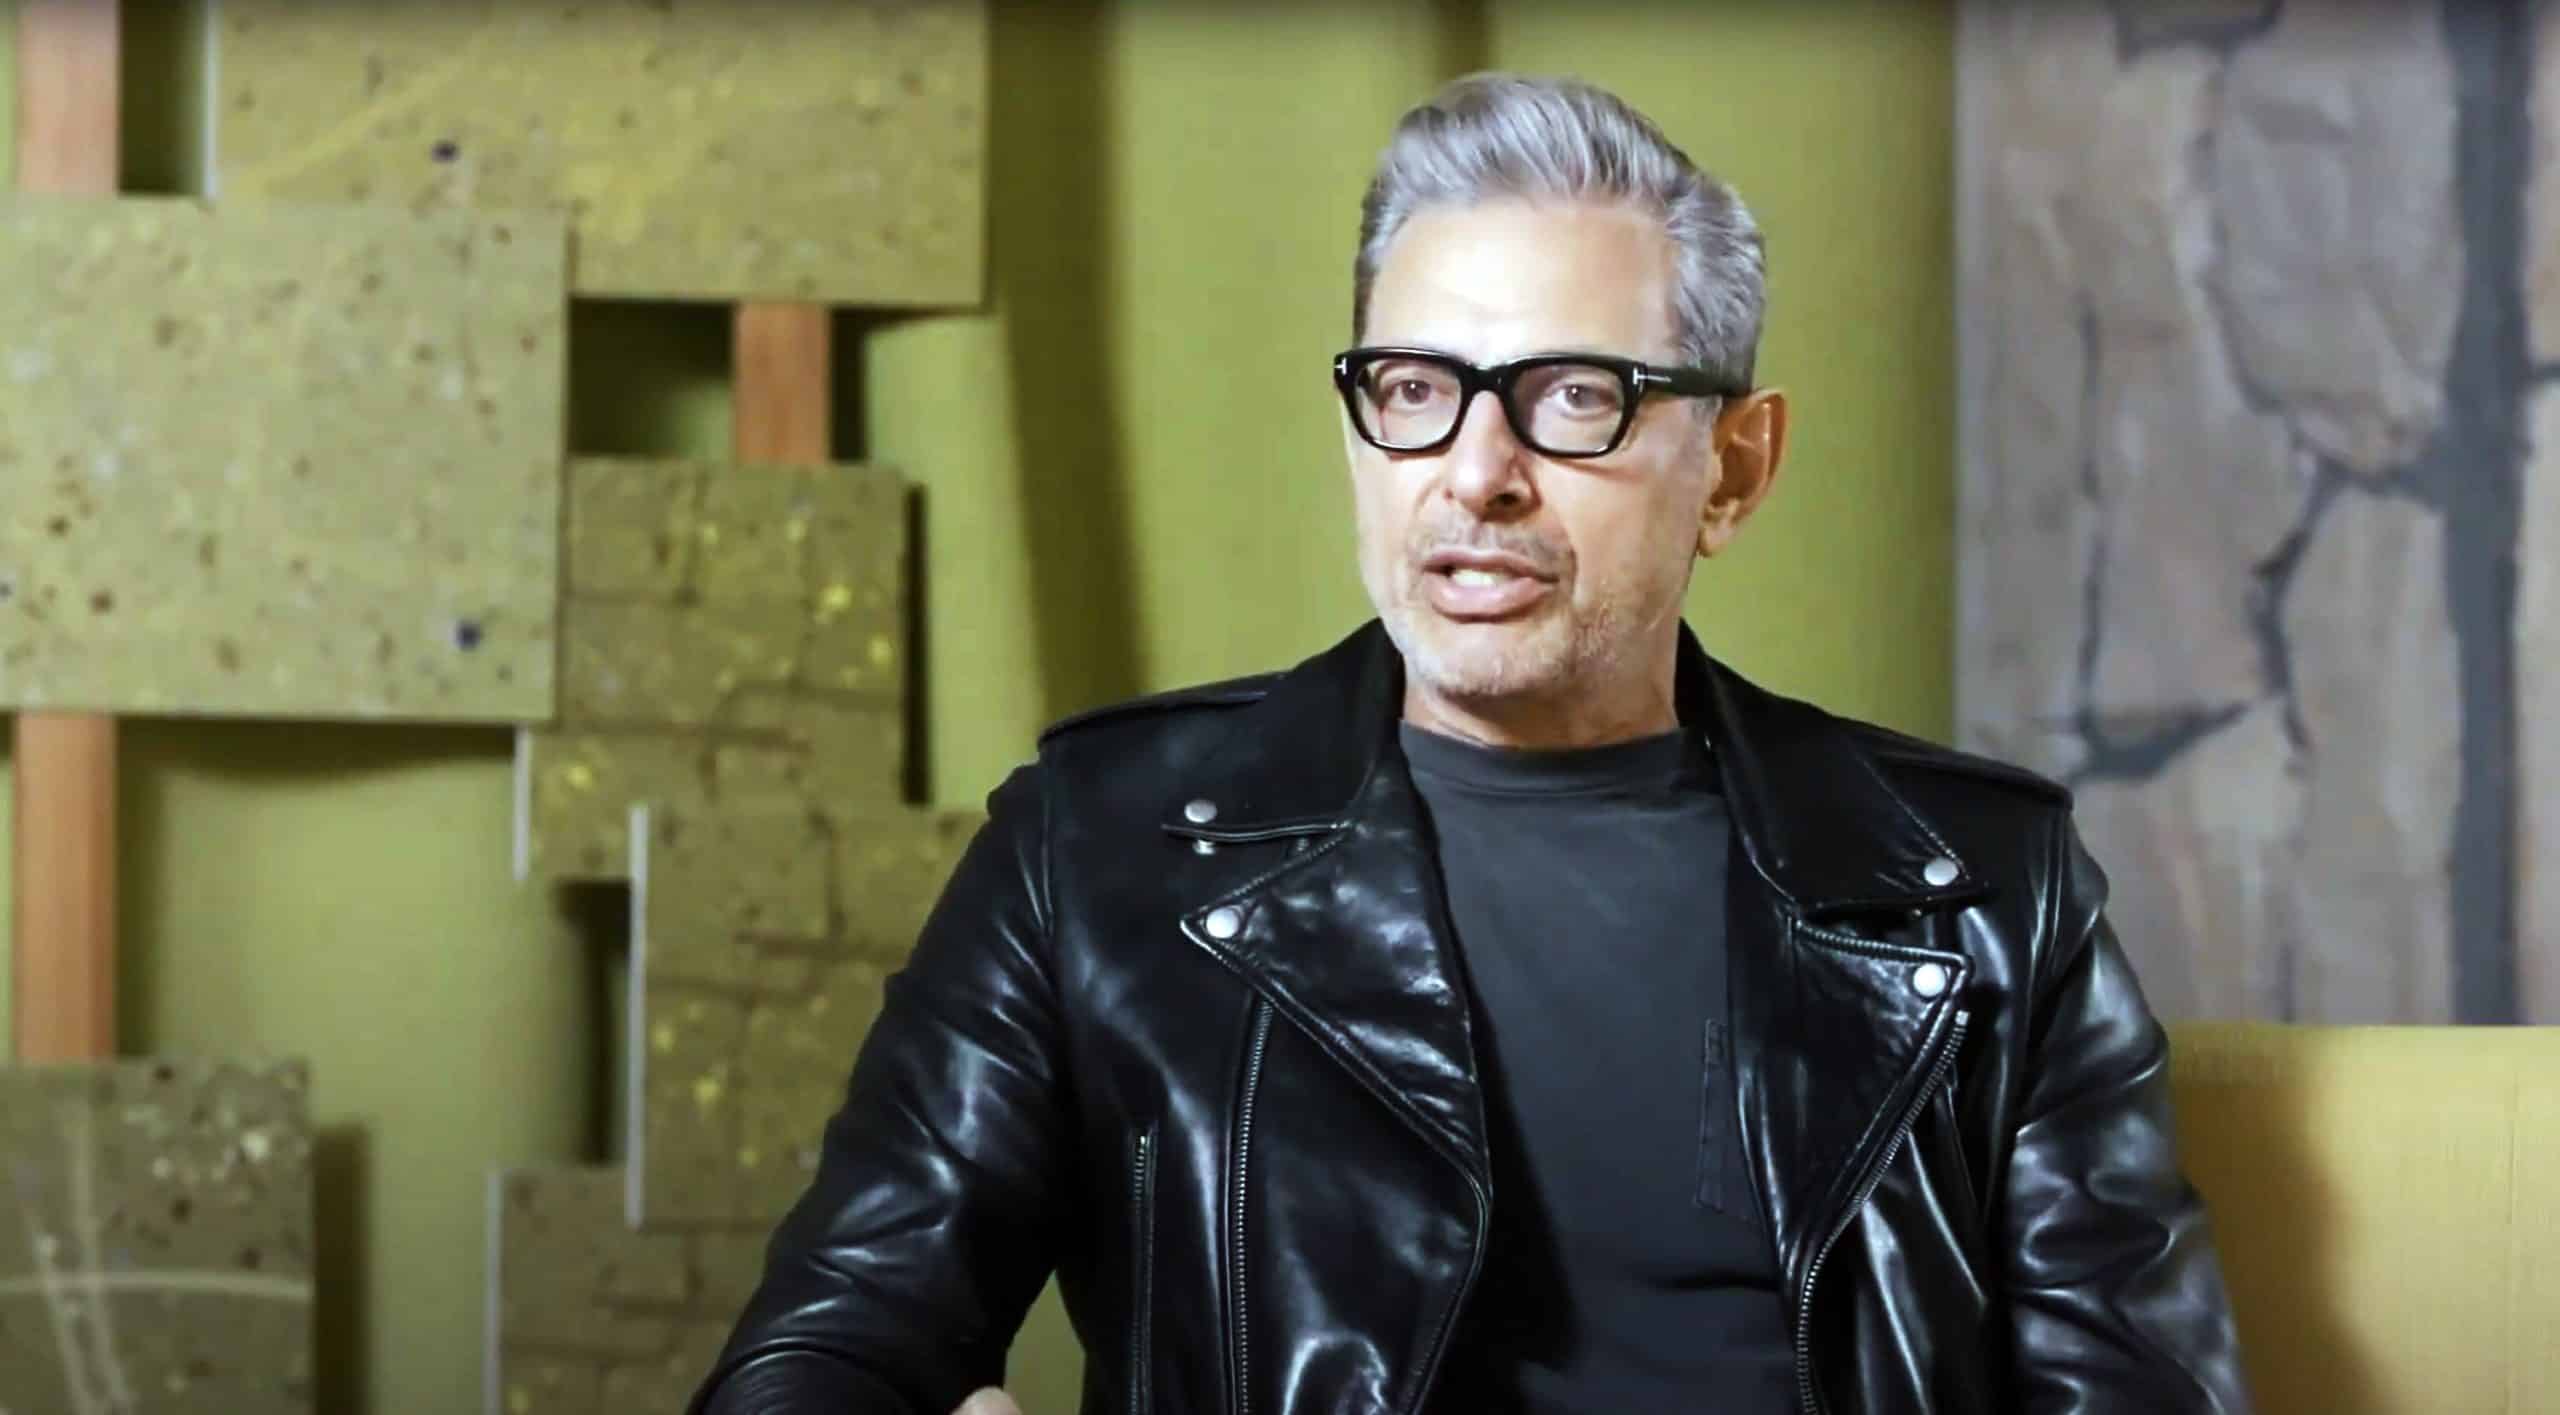 TIME WARP: THE GREATEST CULT FILMS OF ALL-TIME- VOL. 2 HORROR AND SCI-FI, Jeff Goldblum, 2020